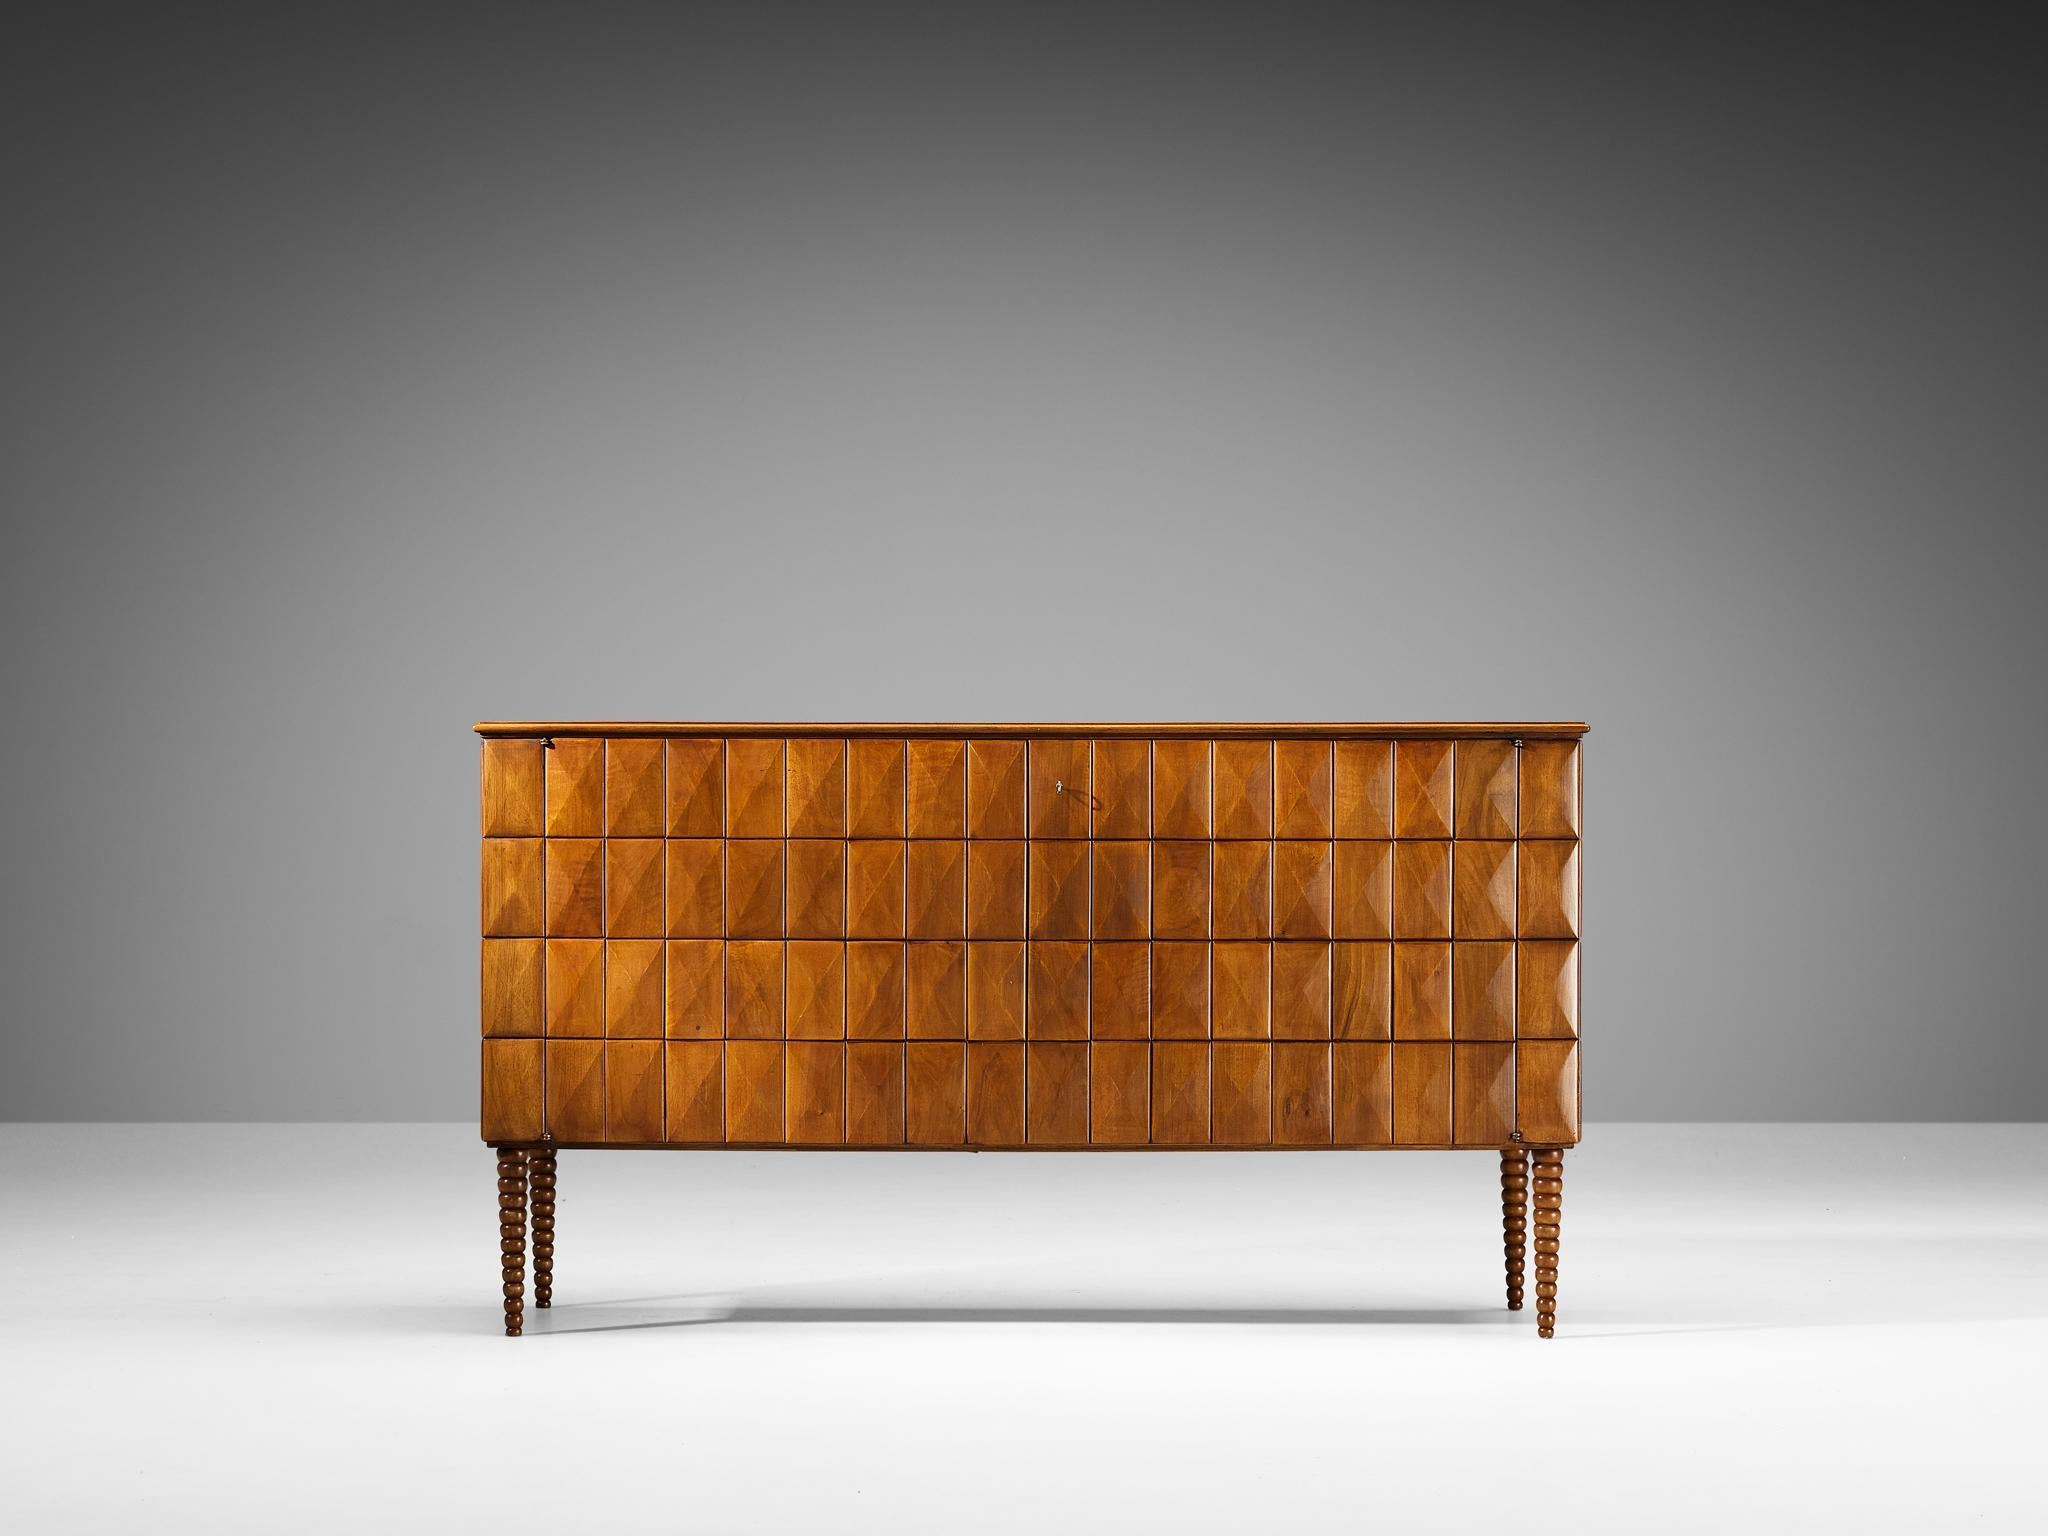 Paolo Buffa sideboard, walnut, brass, Italy, circa 1950

An outstanding piece that breathes sophistication and craftsmanship. Designed by Paolo Buffa in the 1950s, this piece clearly shows the talent of the architect and designer. This cabinet is